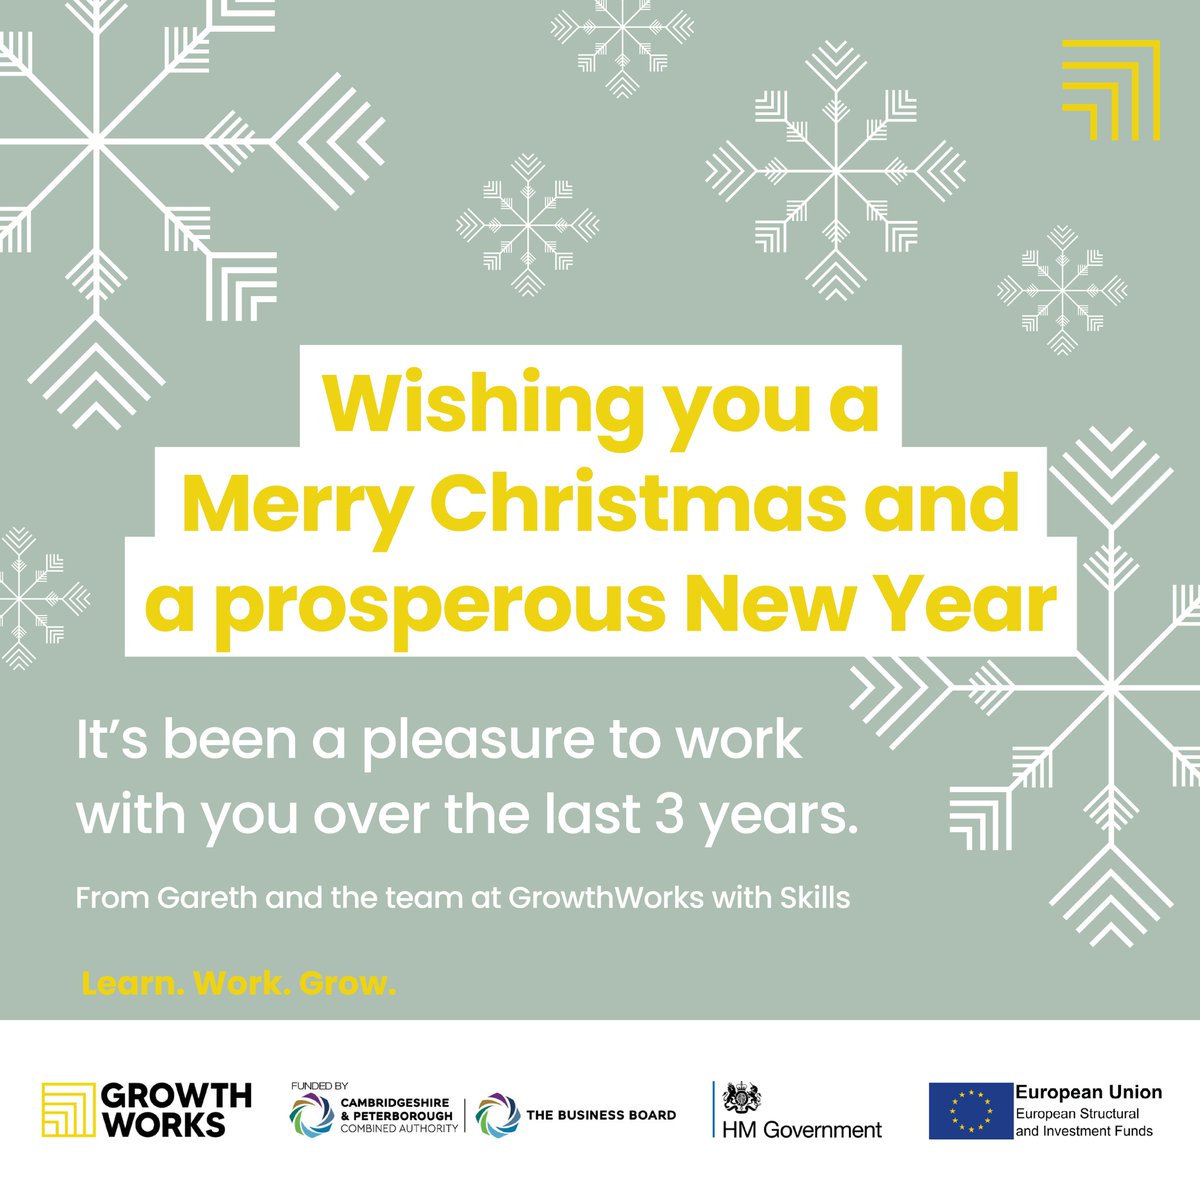 On behalf of Gareth and the entire GrowthWorks with Skills team, we'd like to wish you a very Merry Christmas and a prosperous New Year. #MerryChristmas #HappyNewYear